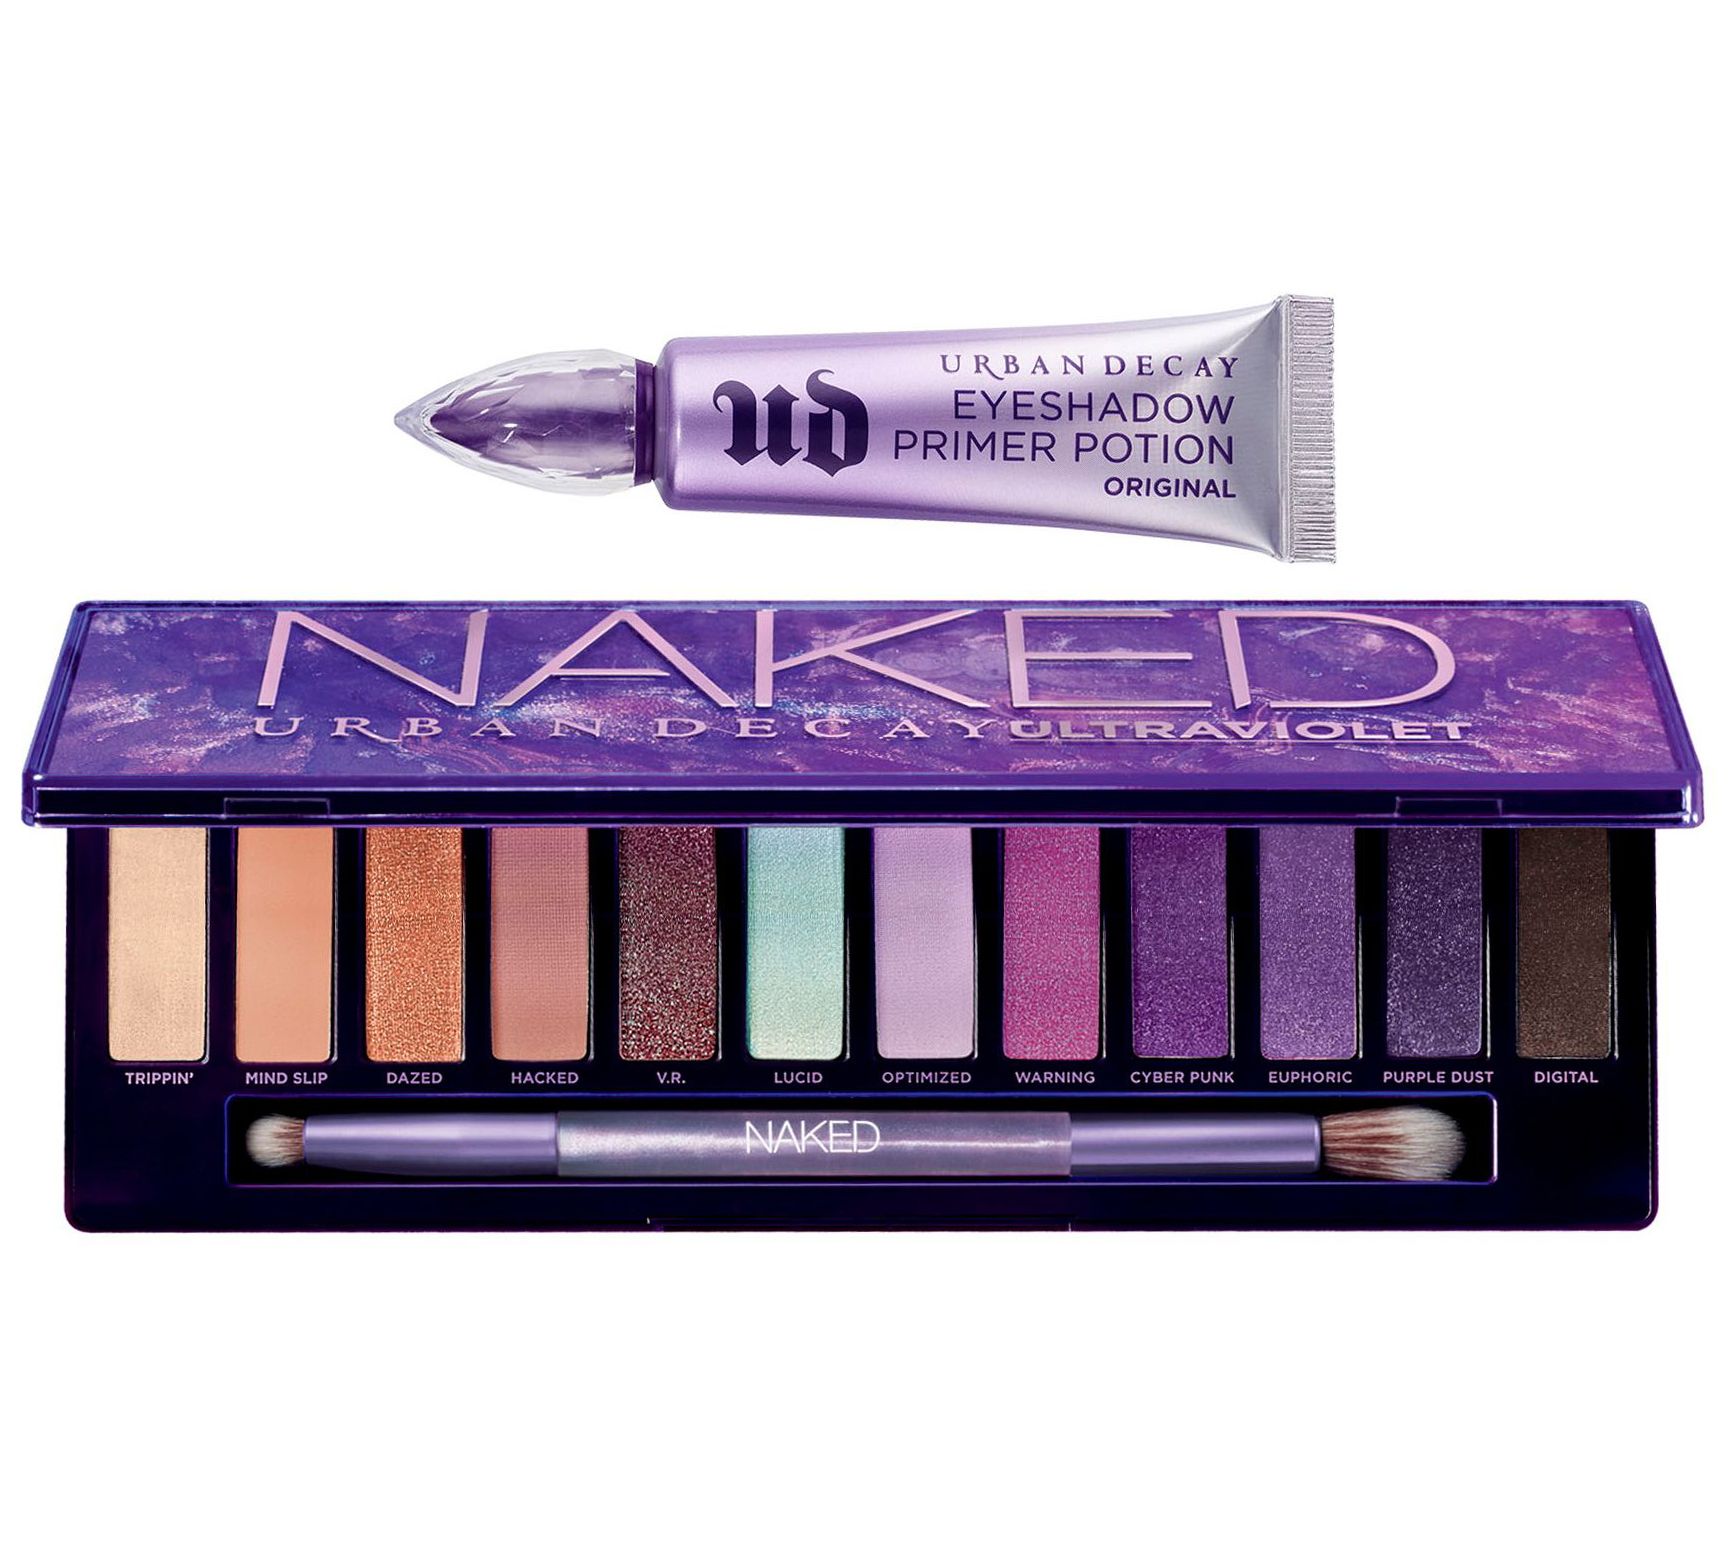 Urban Decay Naked Ultraviolet Palette with Primer Potion - A386874